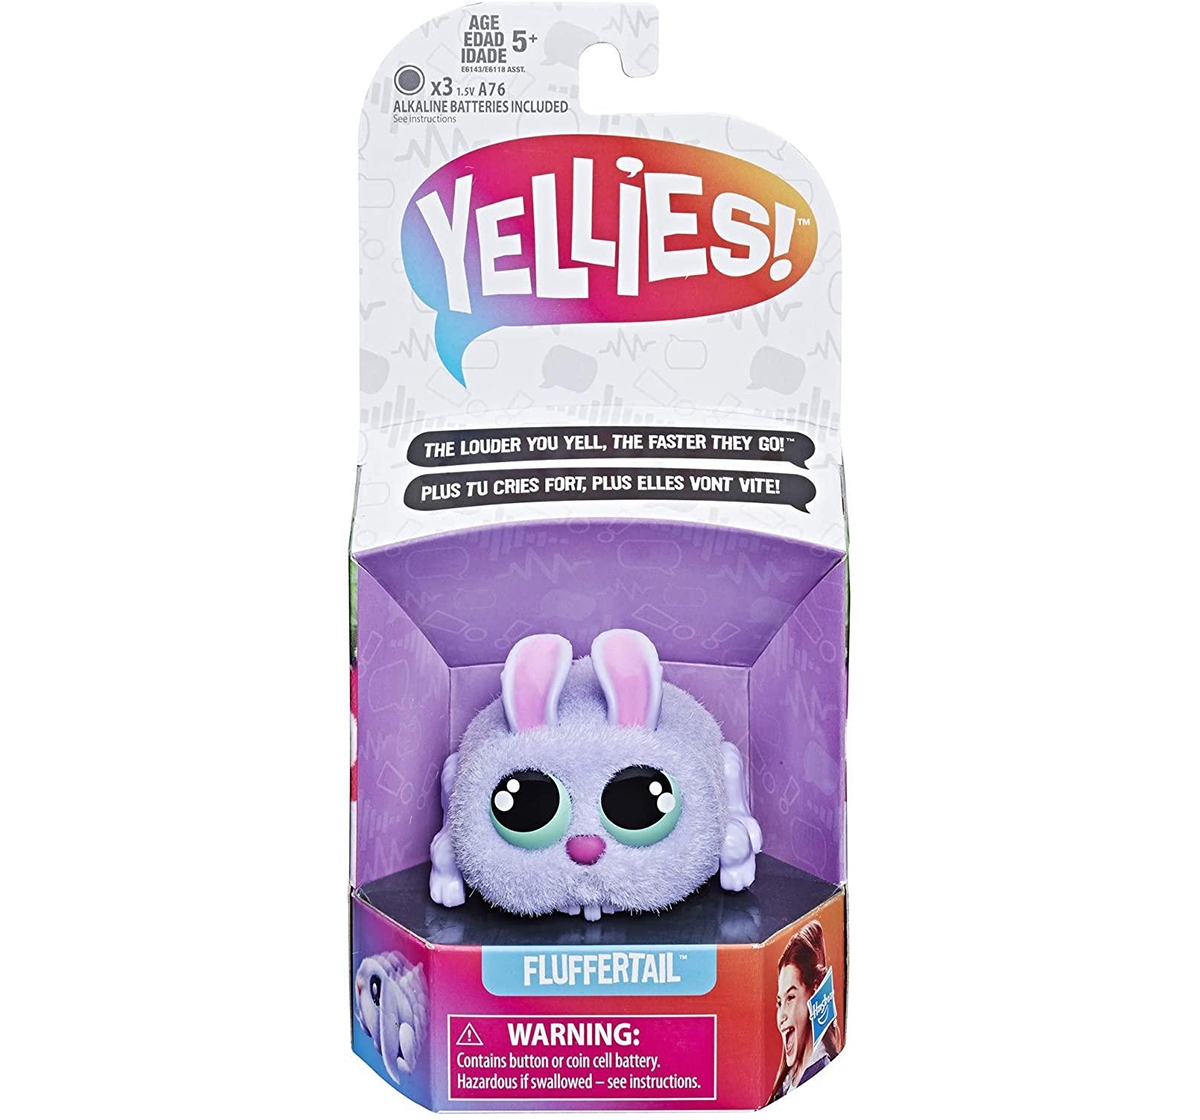 Yellies | Yellies! Voice-Activated Spider Pet Assorted Impulse Toys for Kids age 5Y+ 